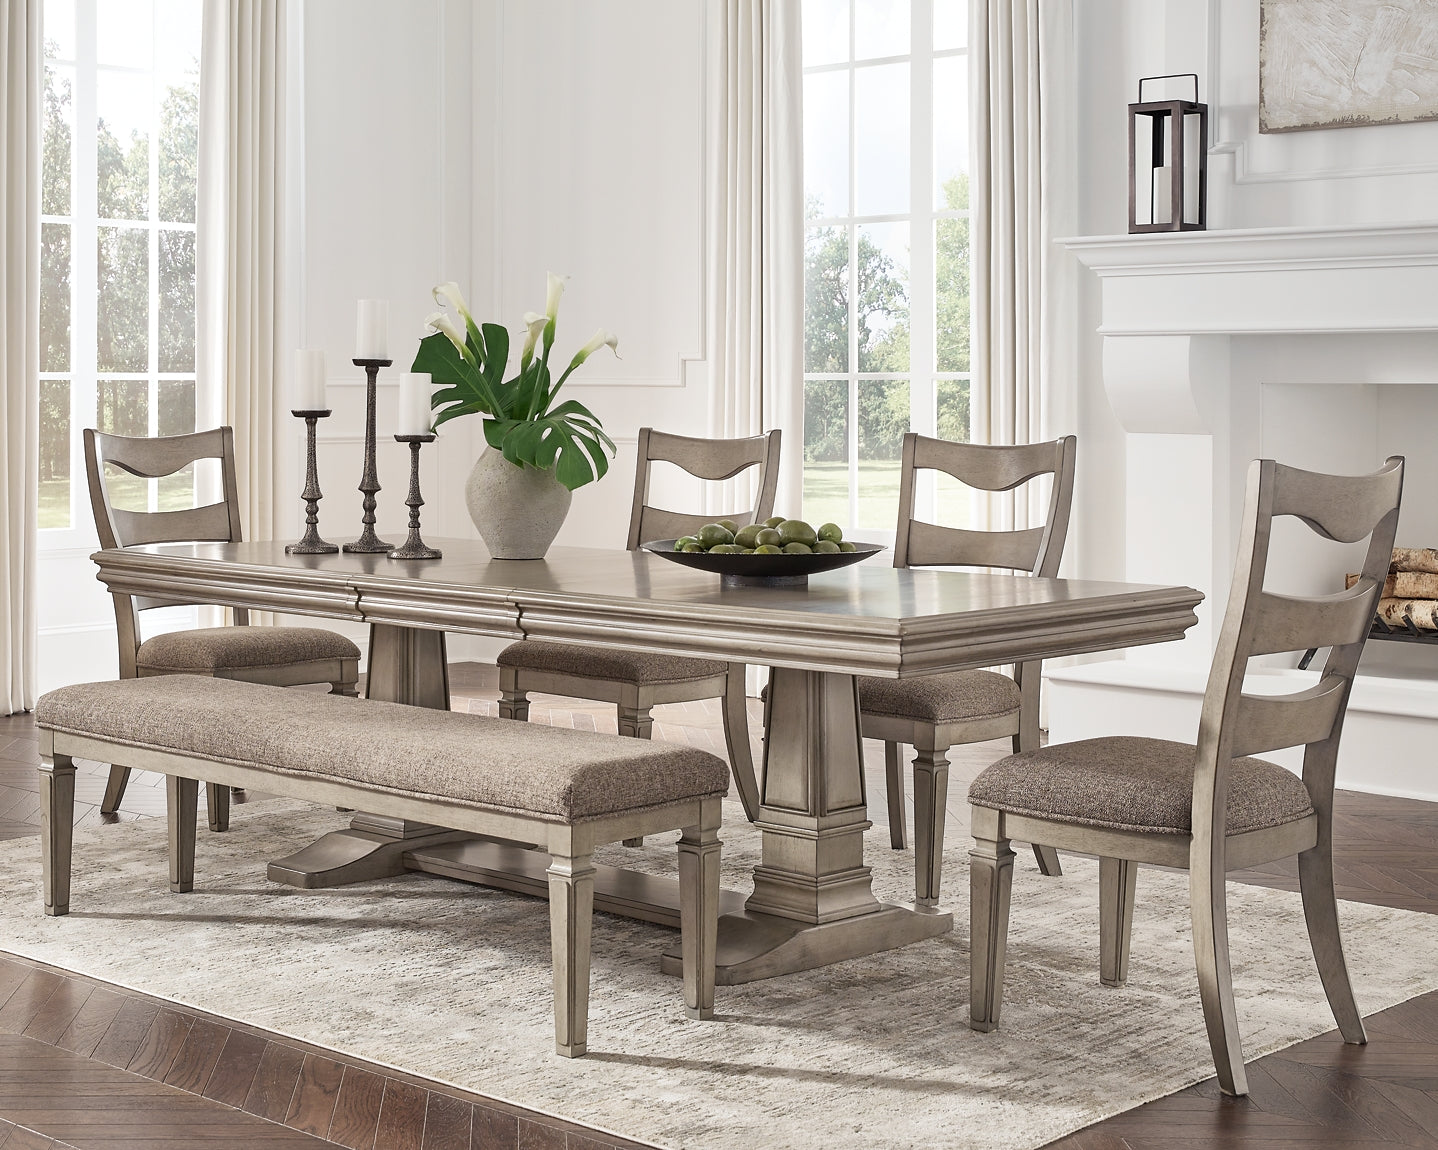 Lexorne Dining Table and 4 Chairs and Bench JB's Furniture  Home Furniture, Home Decor, Furniture Store